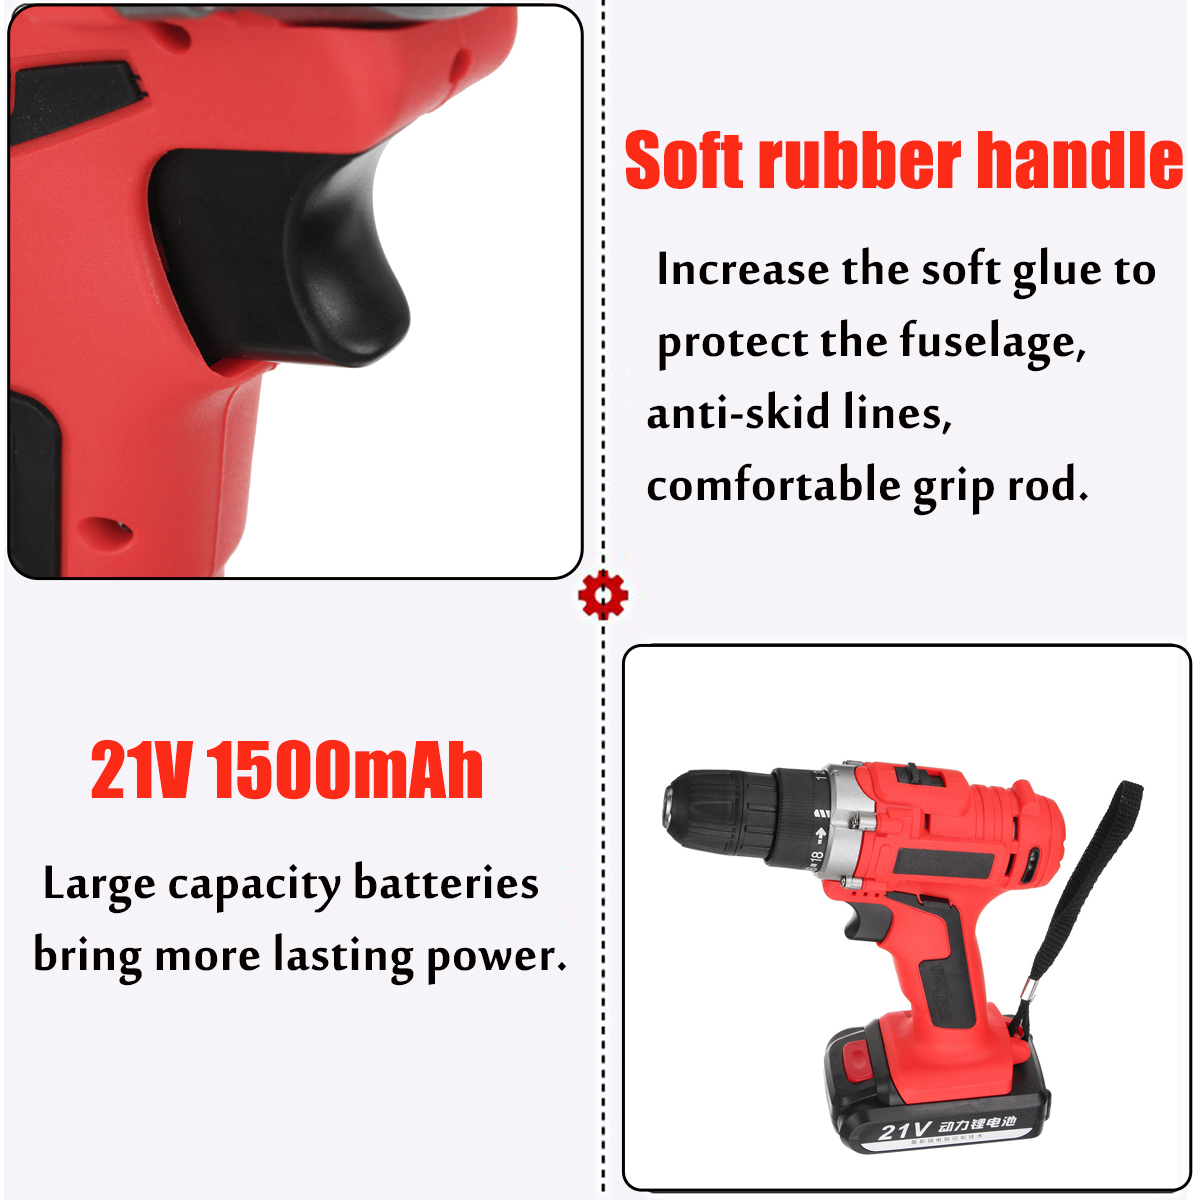 300W-21V-LED-Cordless-Electric-Drill-Screwdriver-1500mAh-Rechargeable-Li-Ion-Battery-Repair-Tools-1421882-5